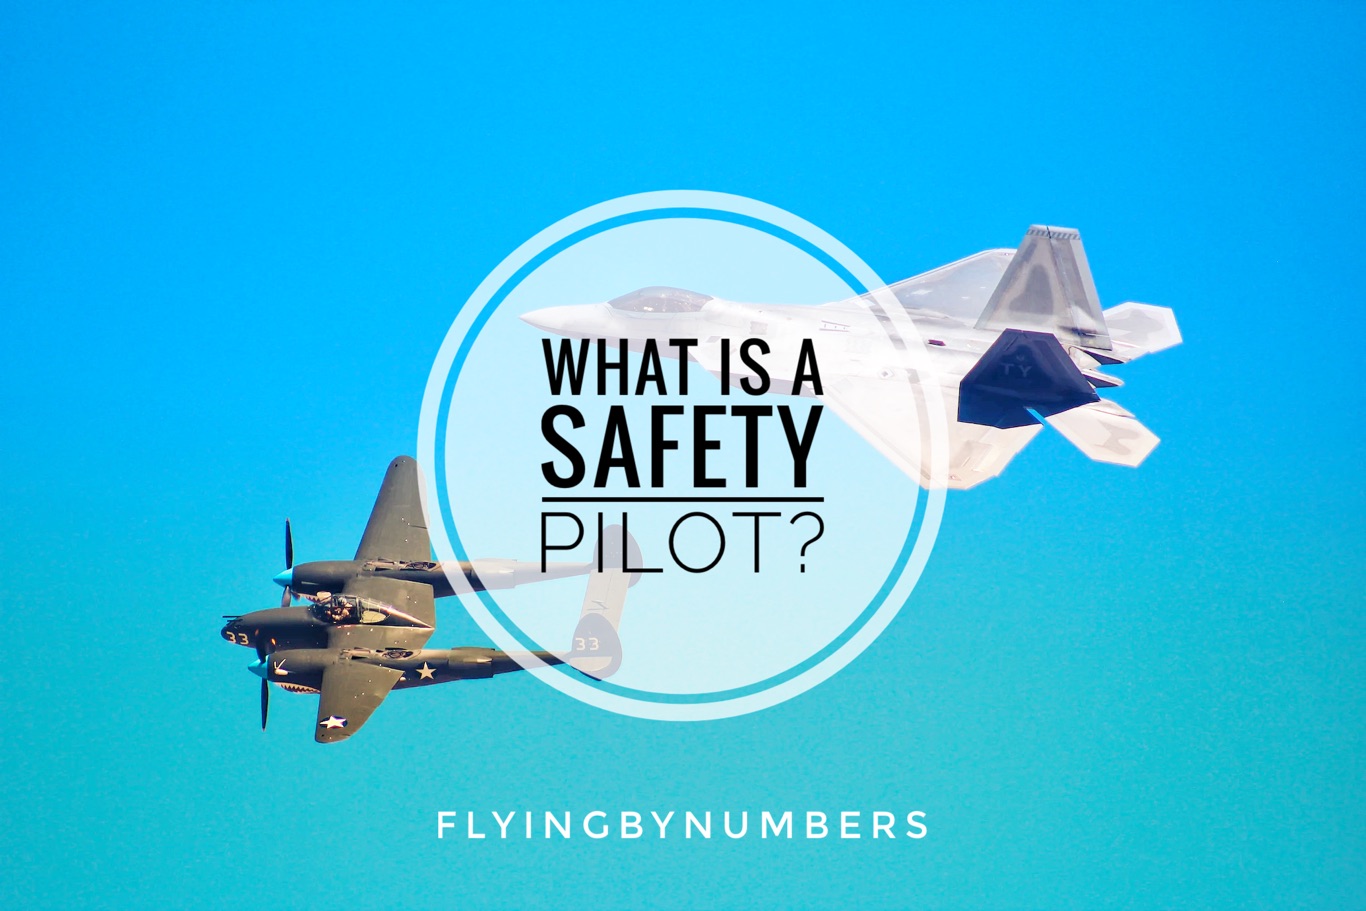 A look at what safety pilots are, and the job they perform